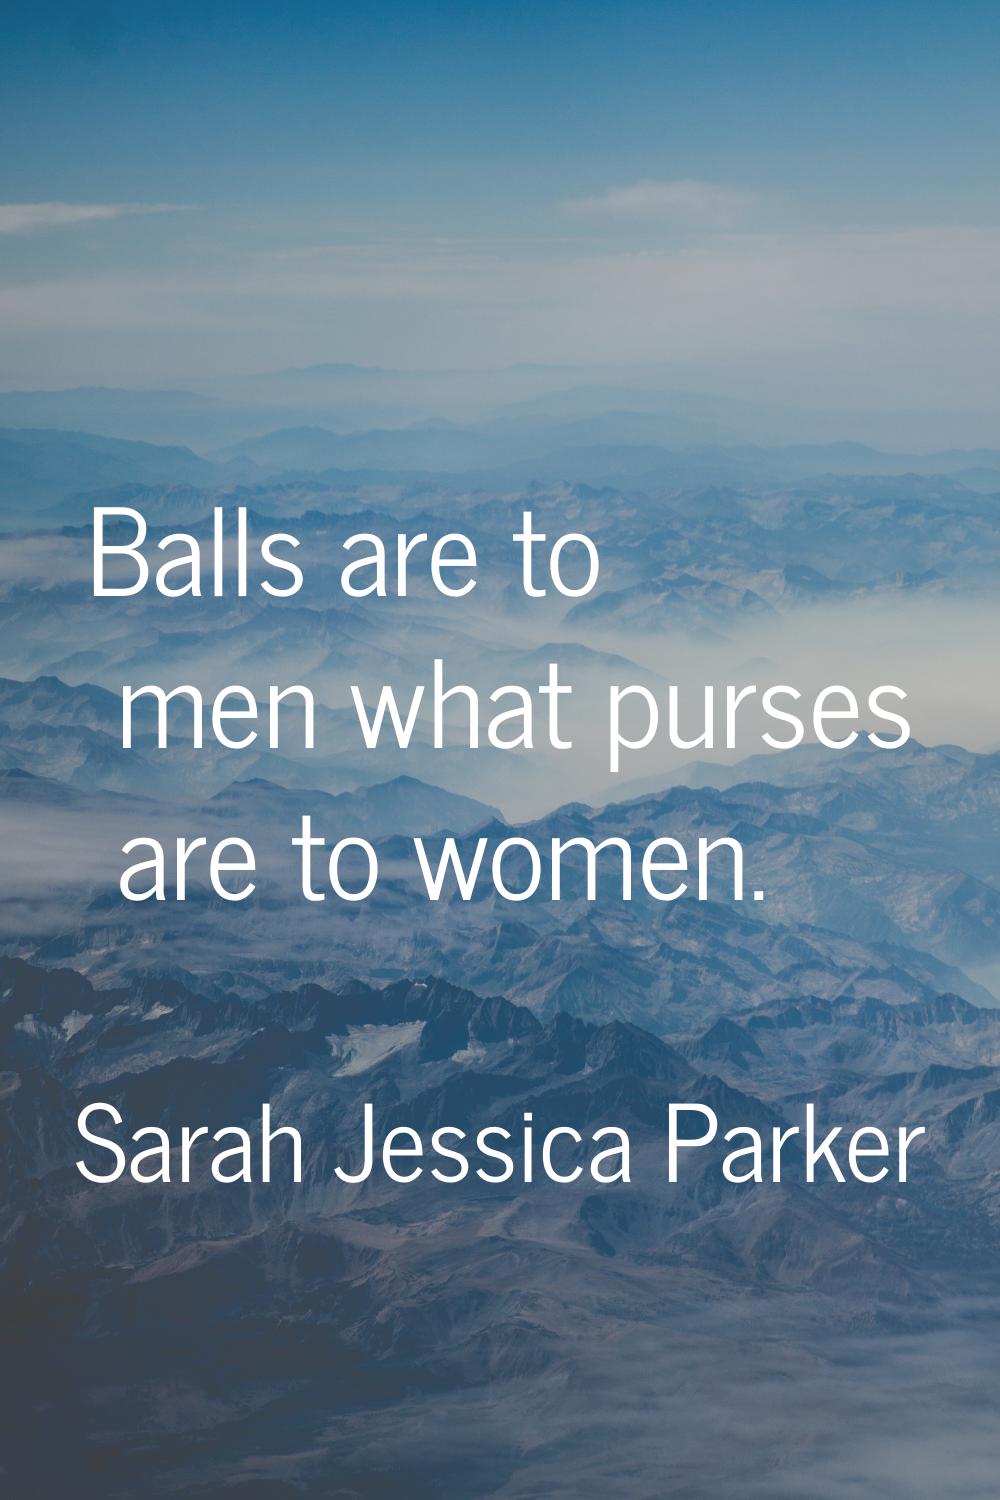 Balls are to men what purses are to women.